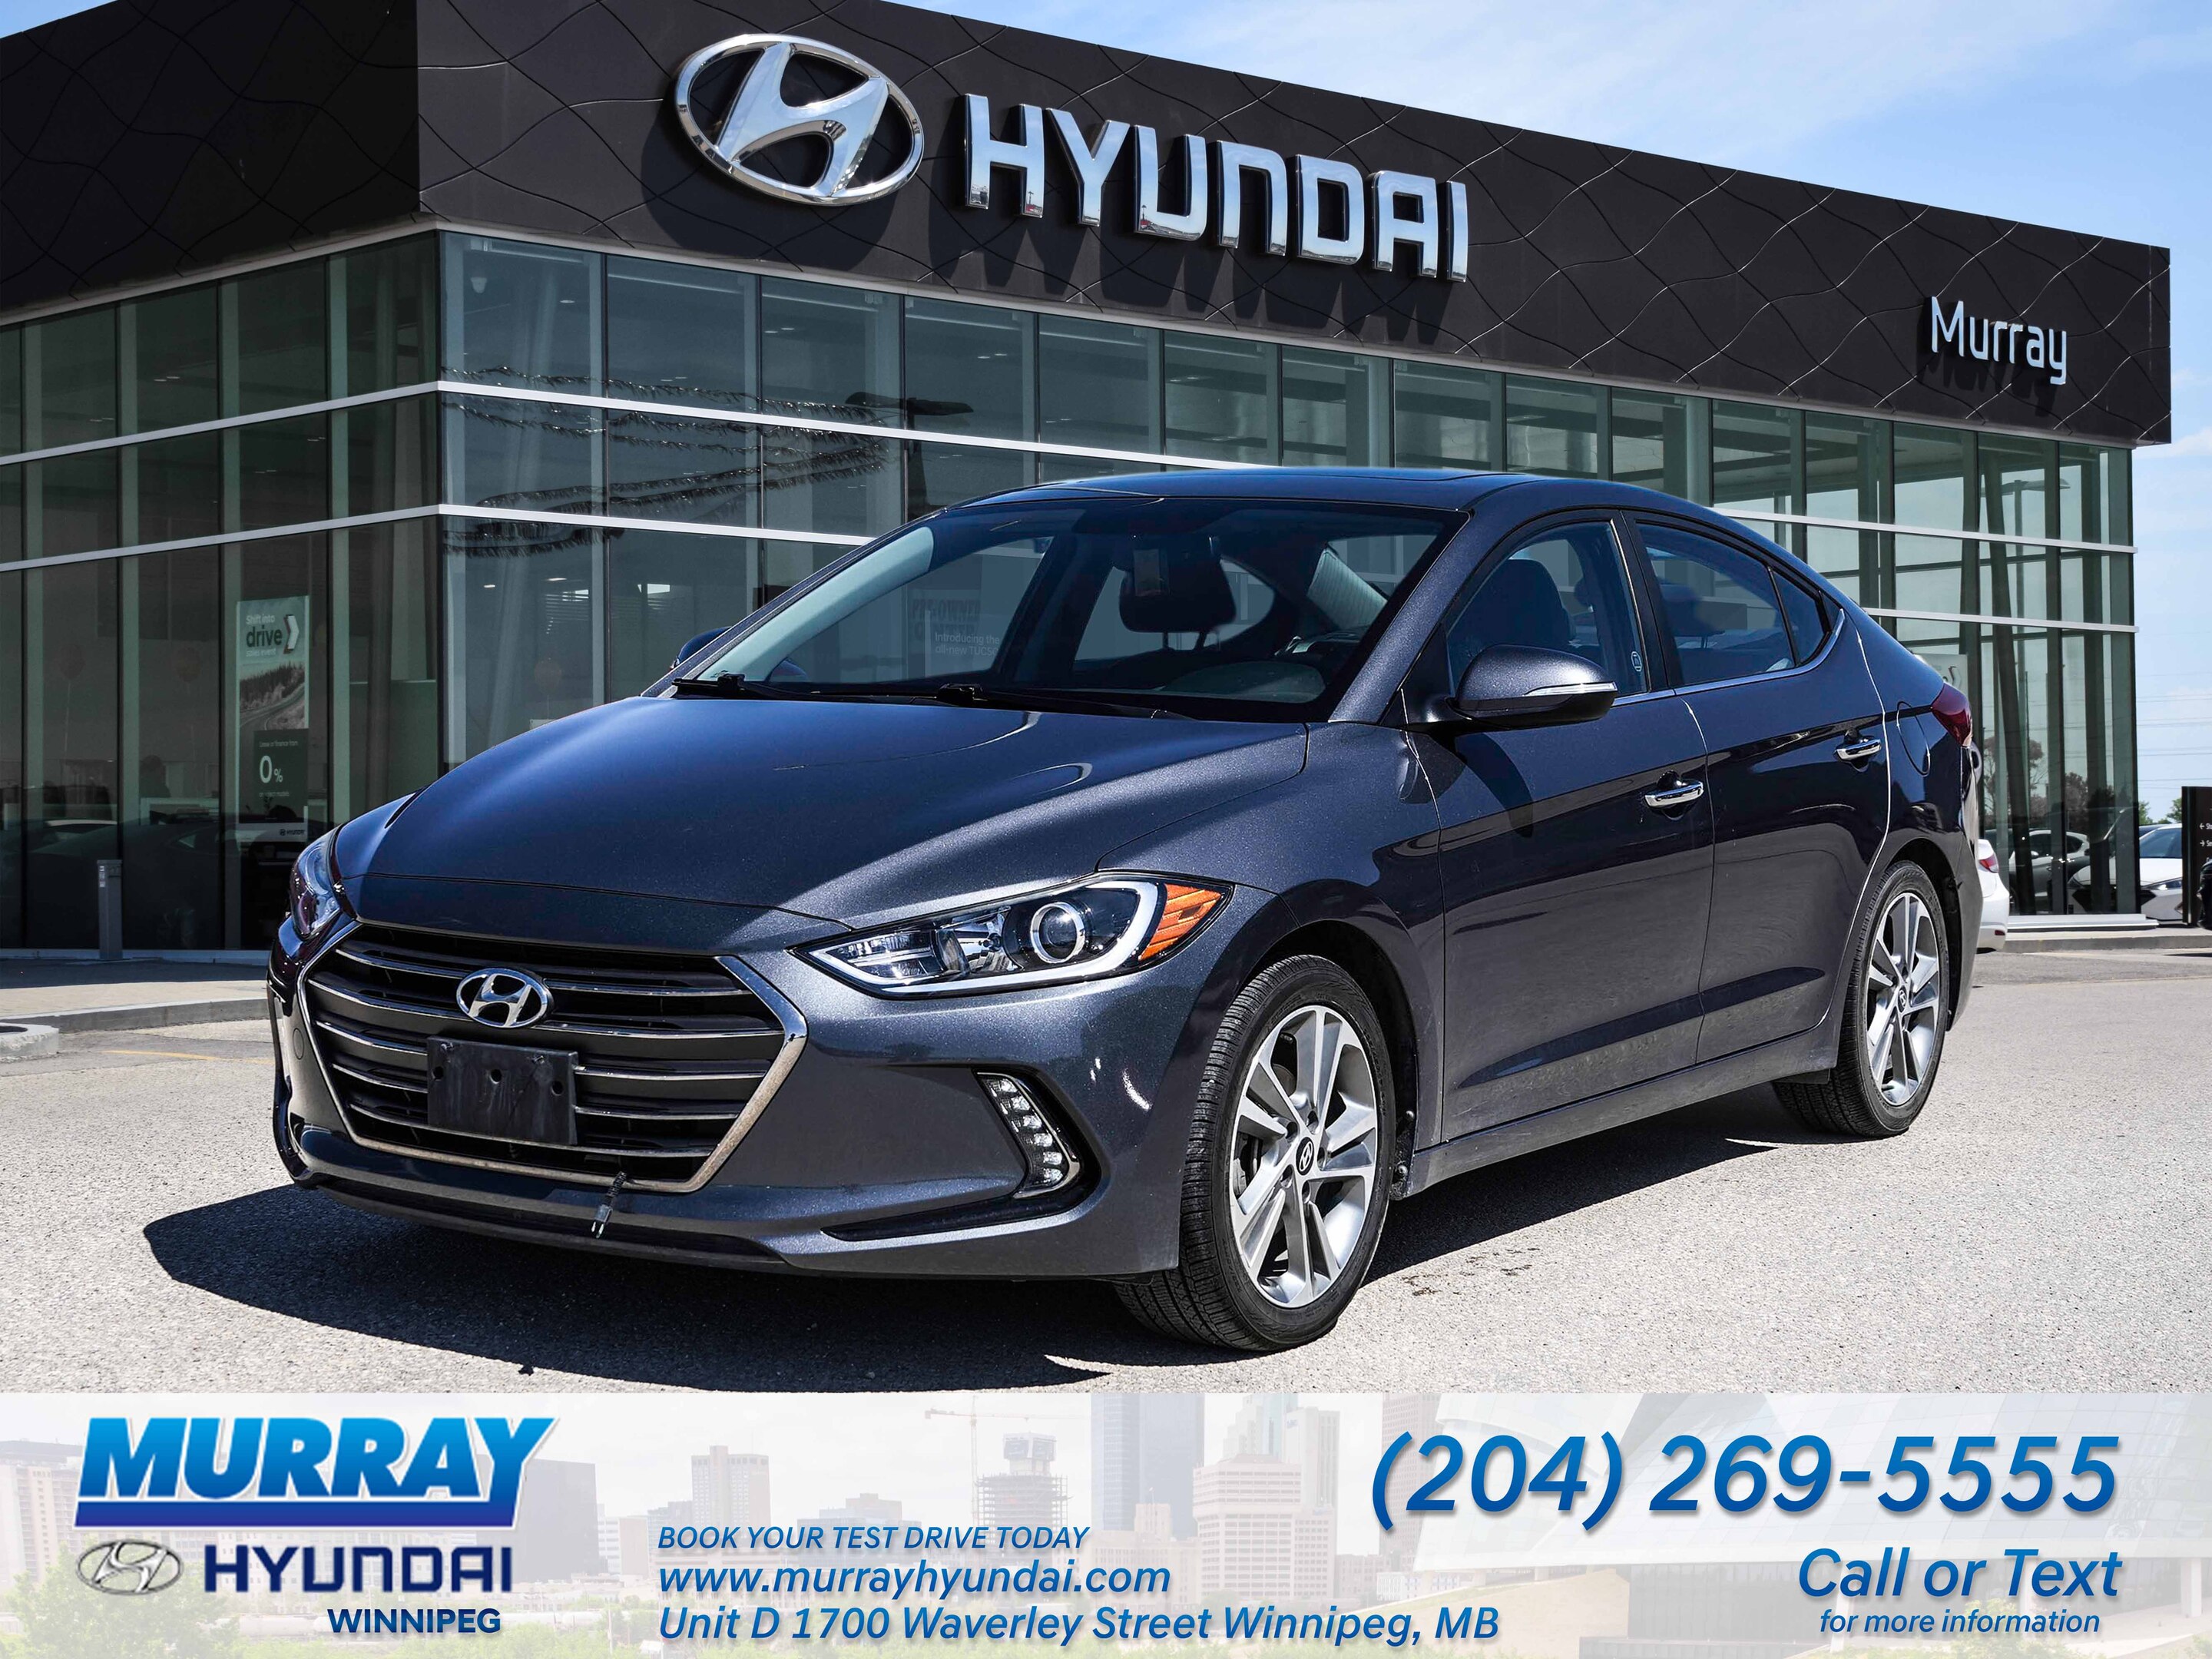 2017 Hyundai Elantra Limited with Memory Seat and Hands-free Trunk